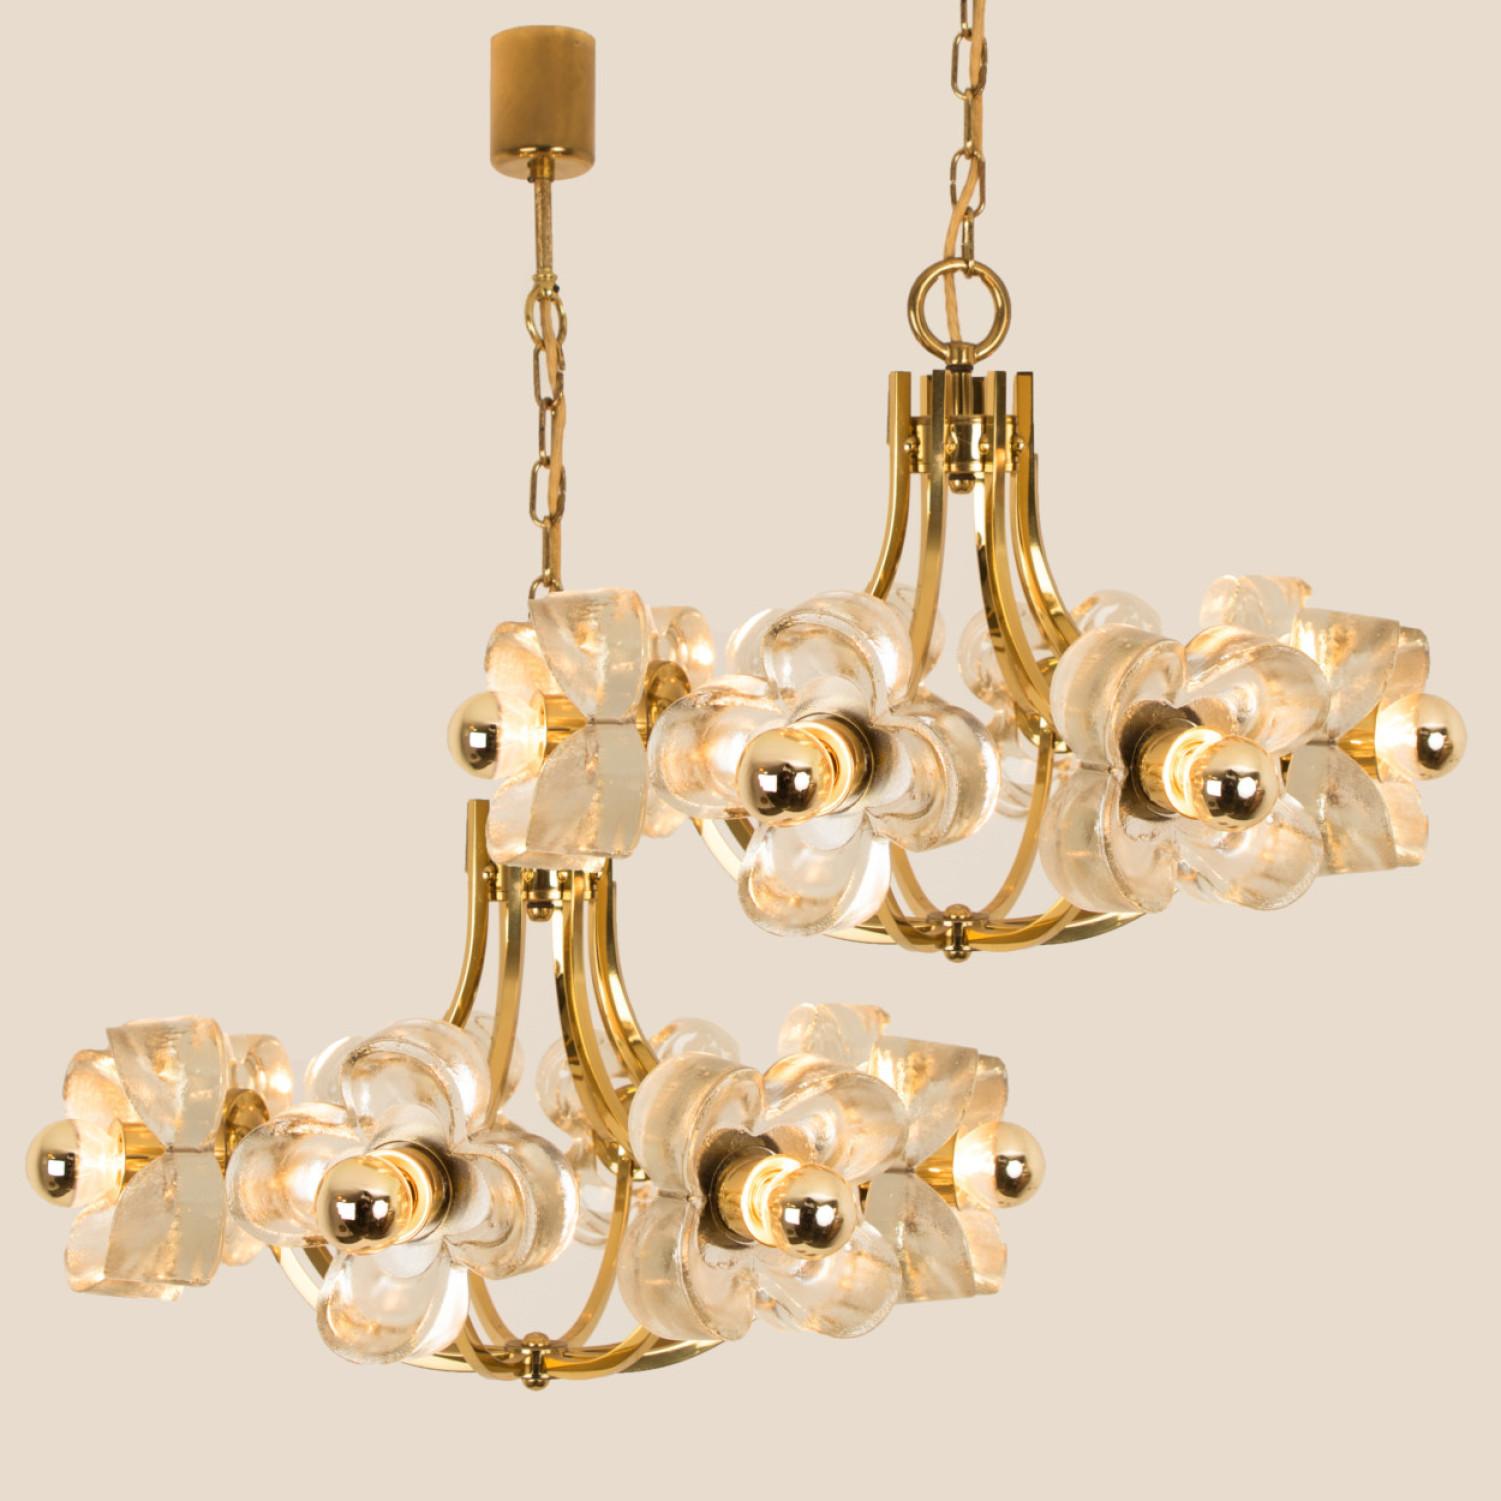 This ceiling light was designed by Simon and Schelle, featuring a rectangular brass base and eight massive glasses in the shape of a four lobed flower.

Dimensions:
Height 15.75 (40cm) total 51.18 (130 cm)
Diameter 23.62 (60 cm)

Please notice the